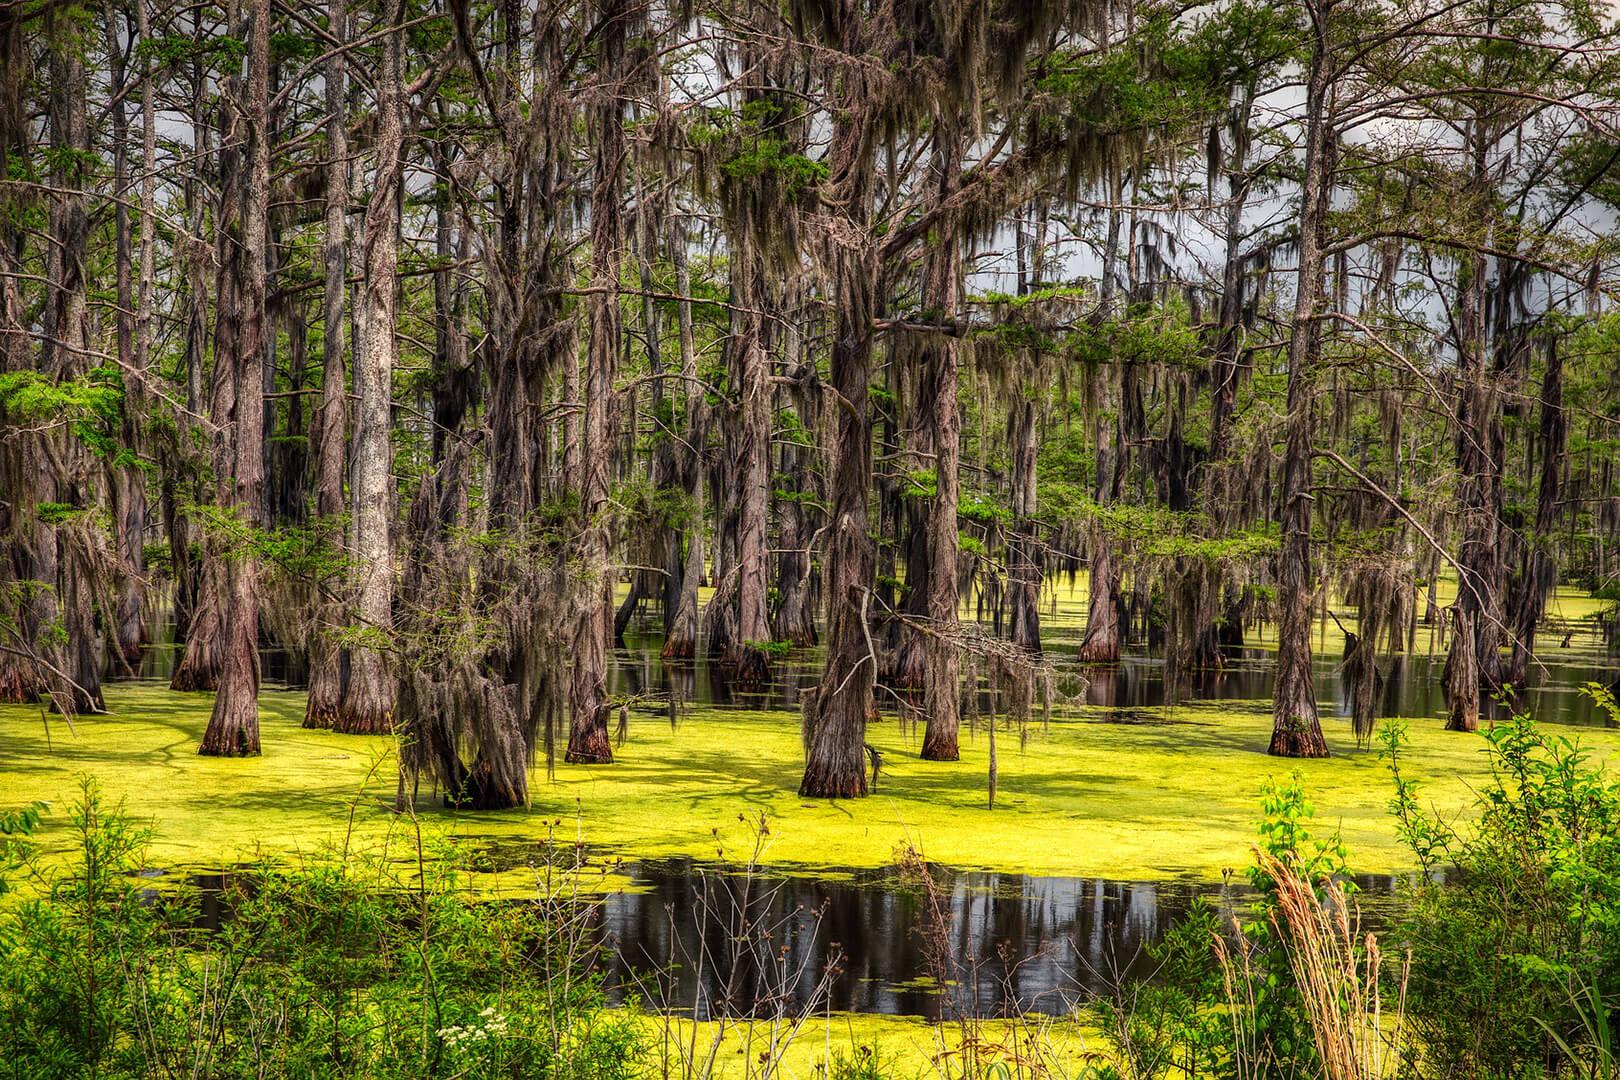 A swamp in Mississippi, showing many trees and water covered with green algae